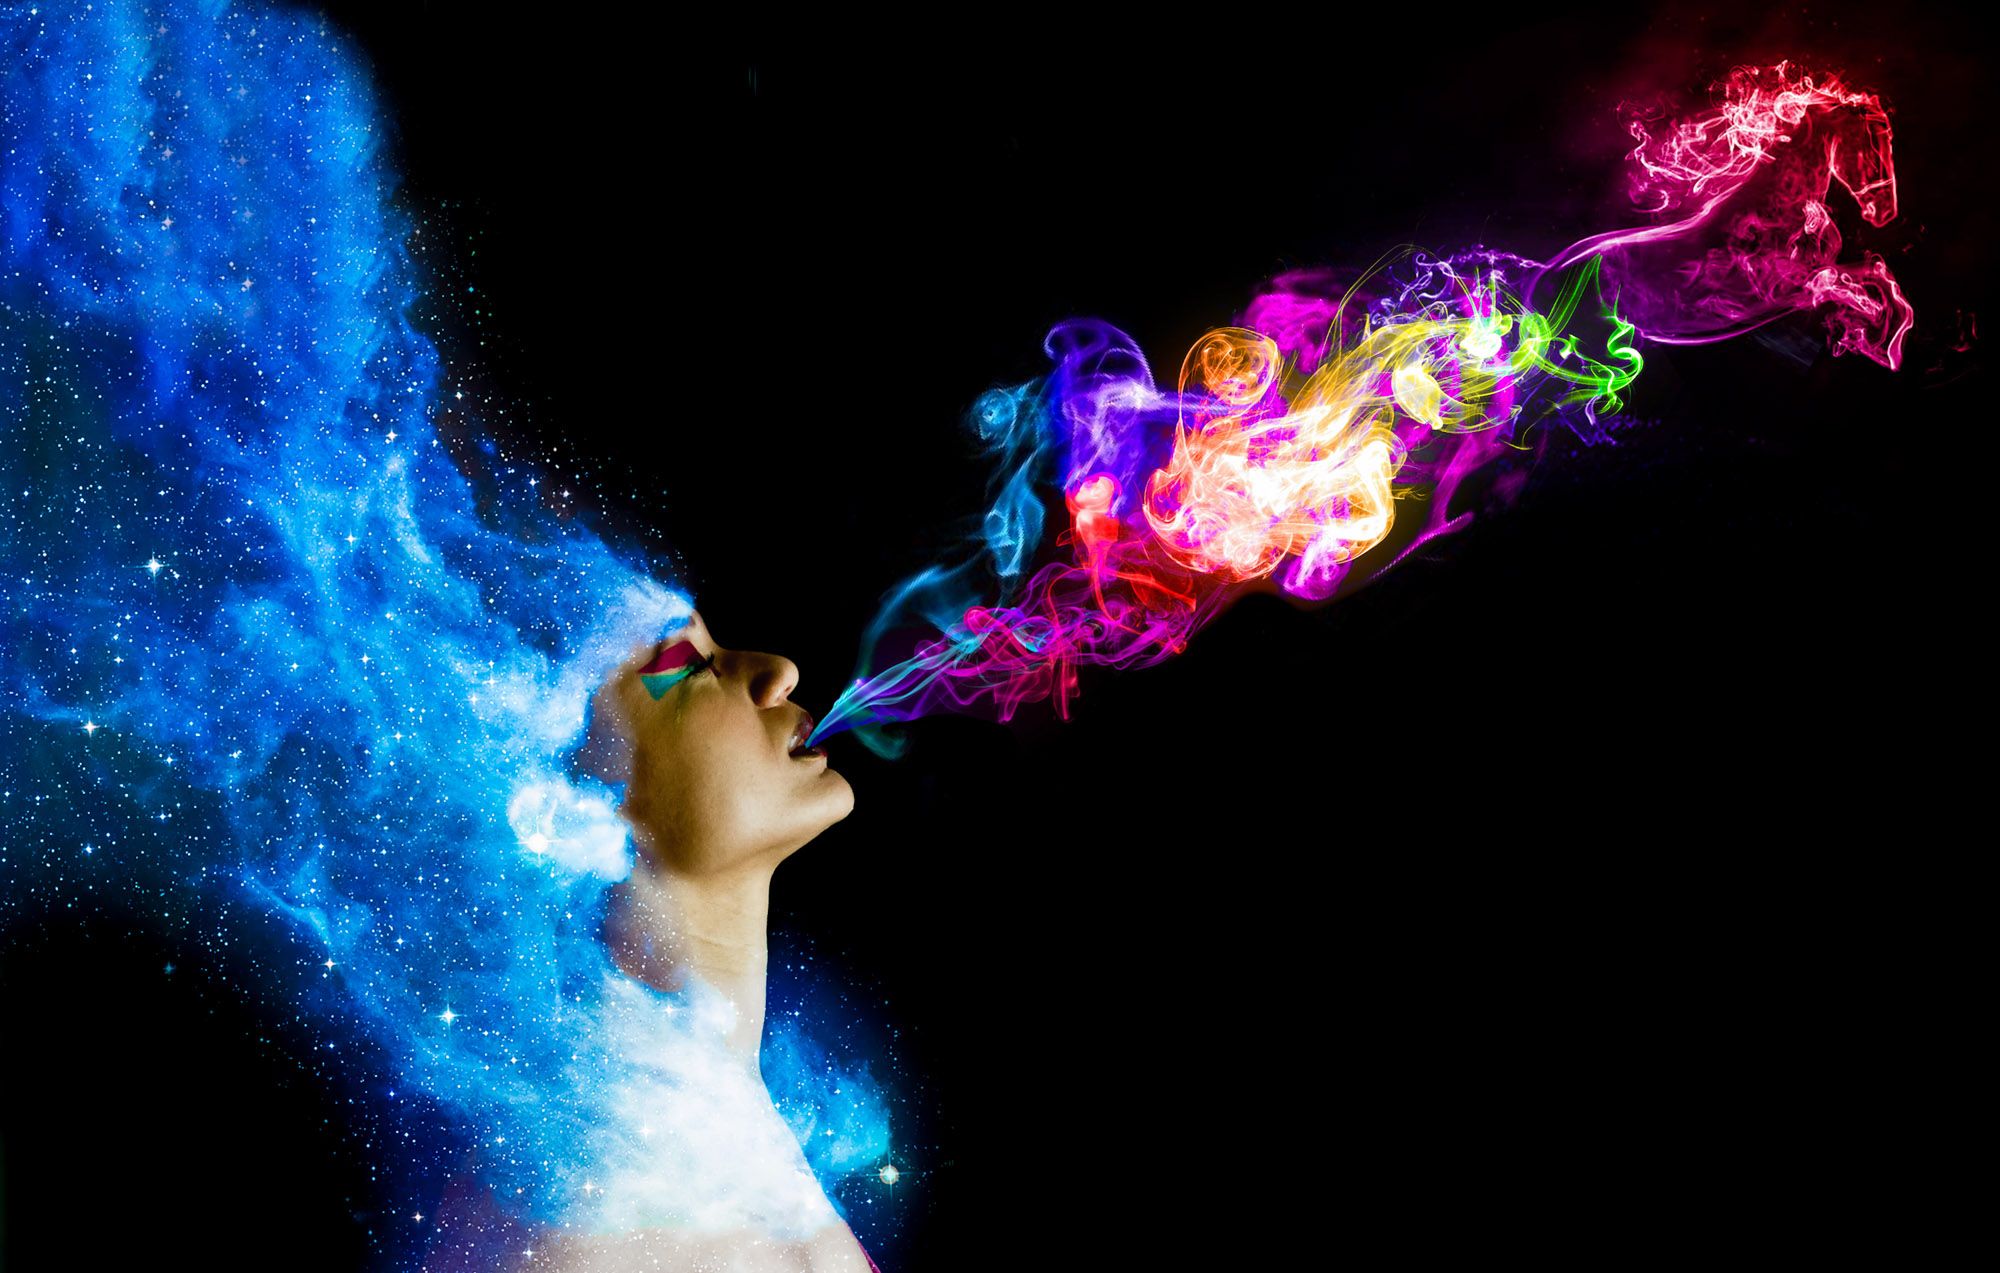 awesome wallpapers hd thc imagination